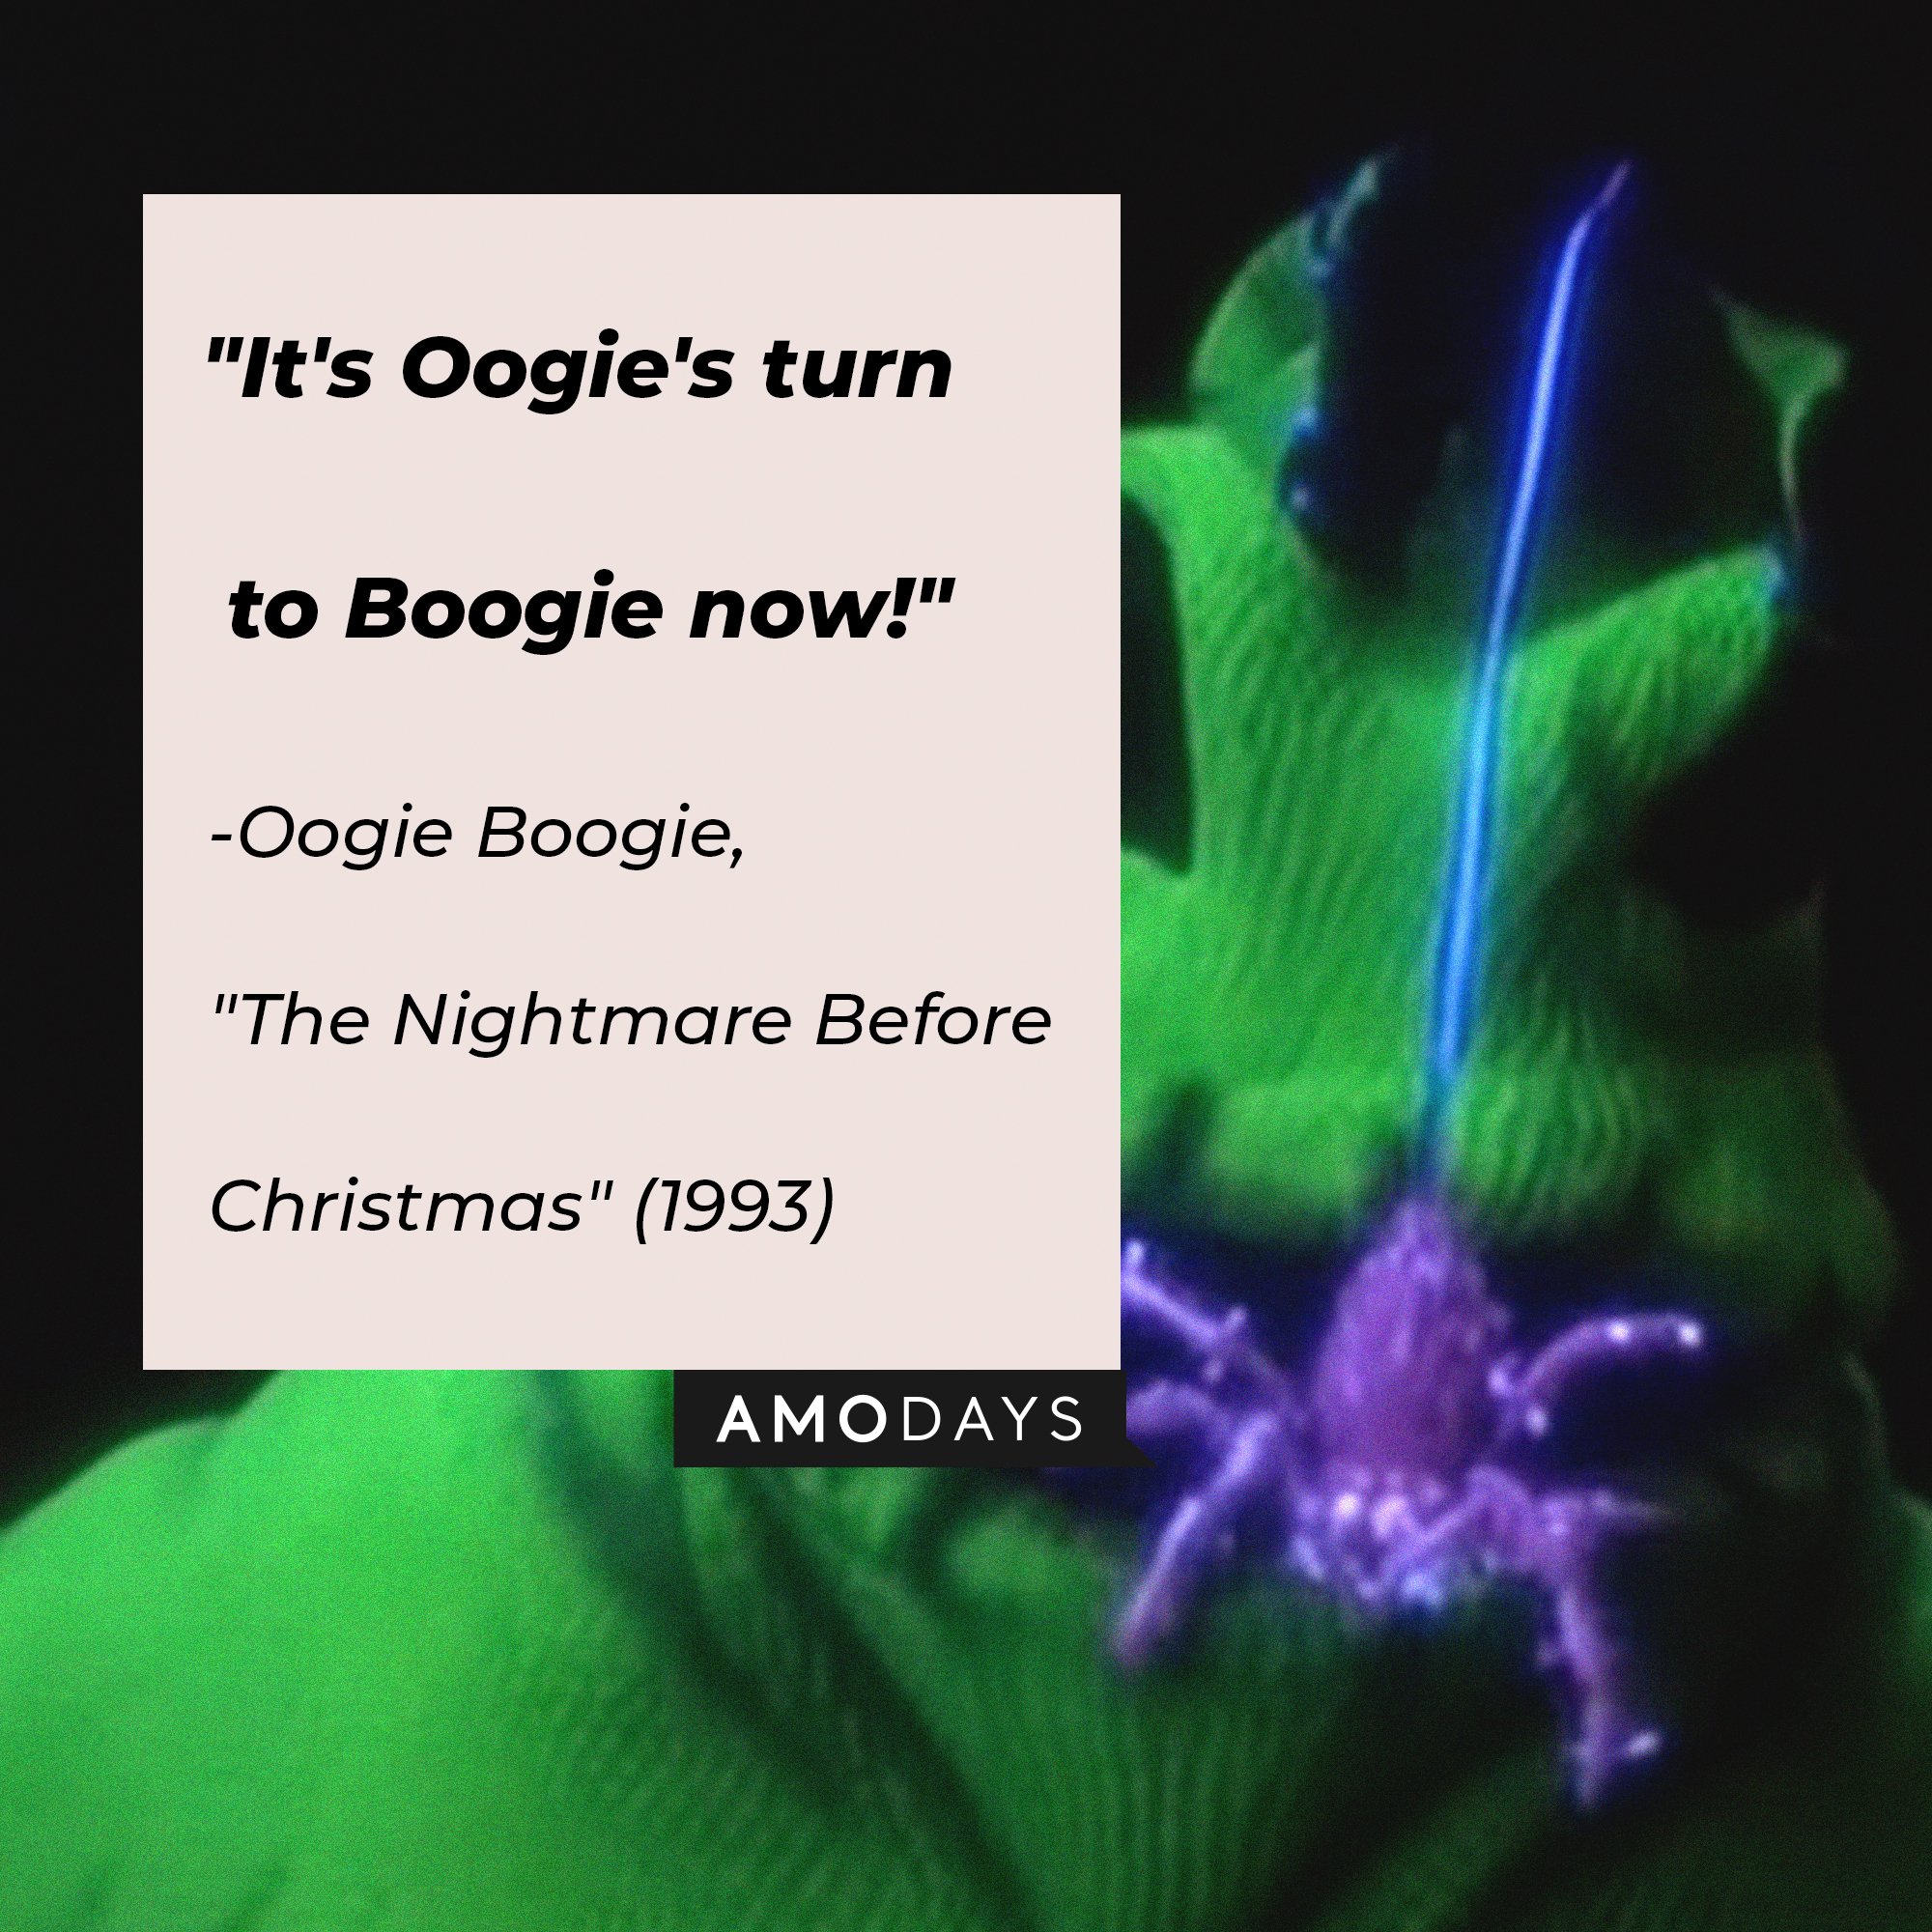  Oogie Boogie’s quote from "The Nightmare Before Christmas": "It's Oogie's turn to Boogie now!"  | Image: AmoDays